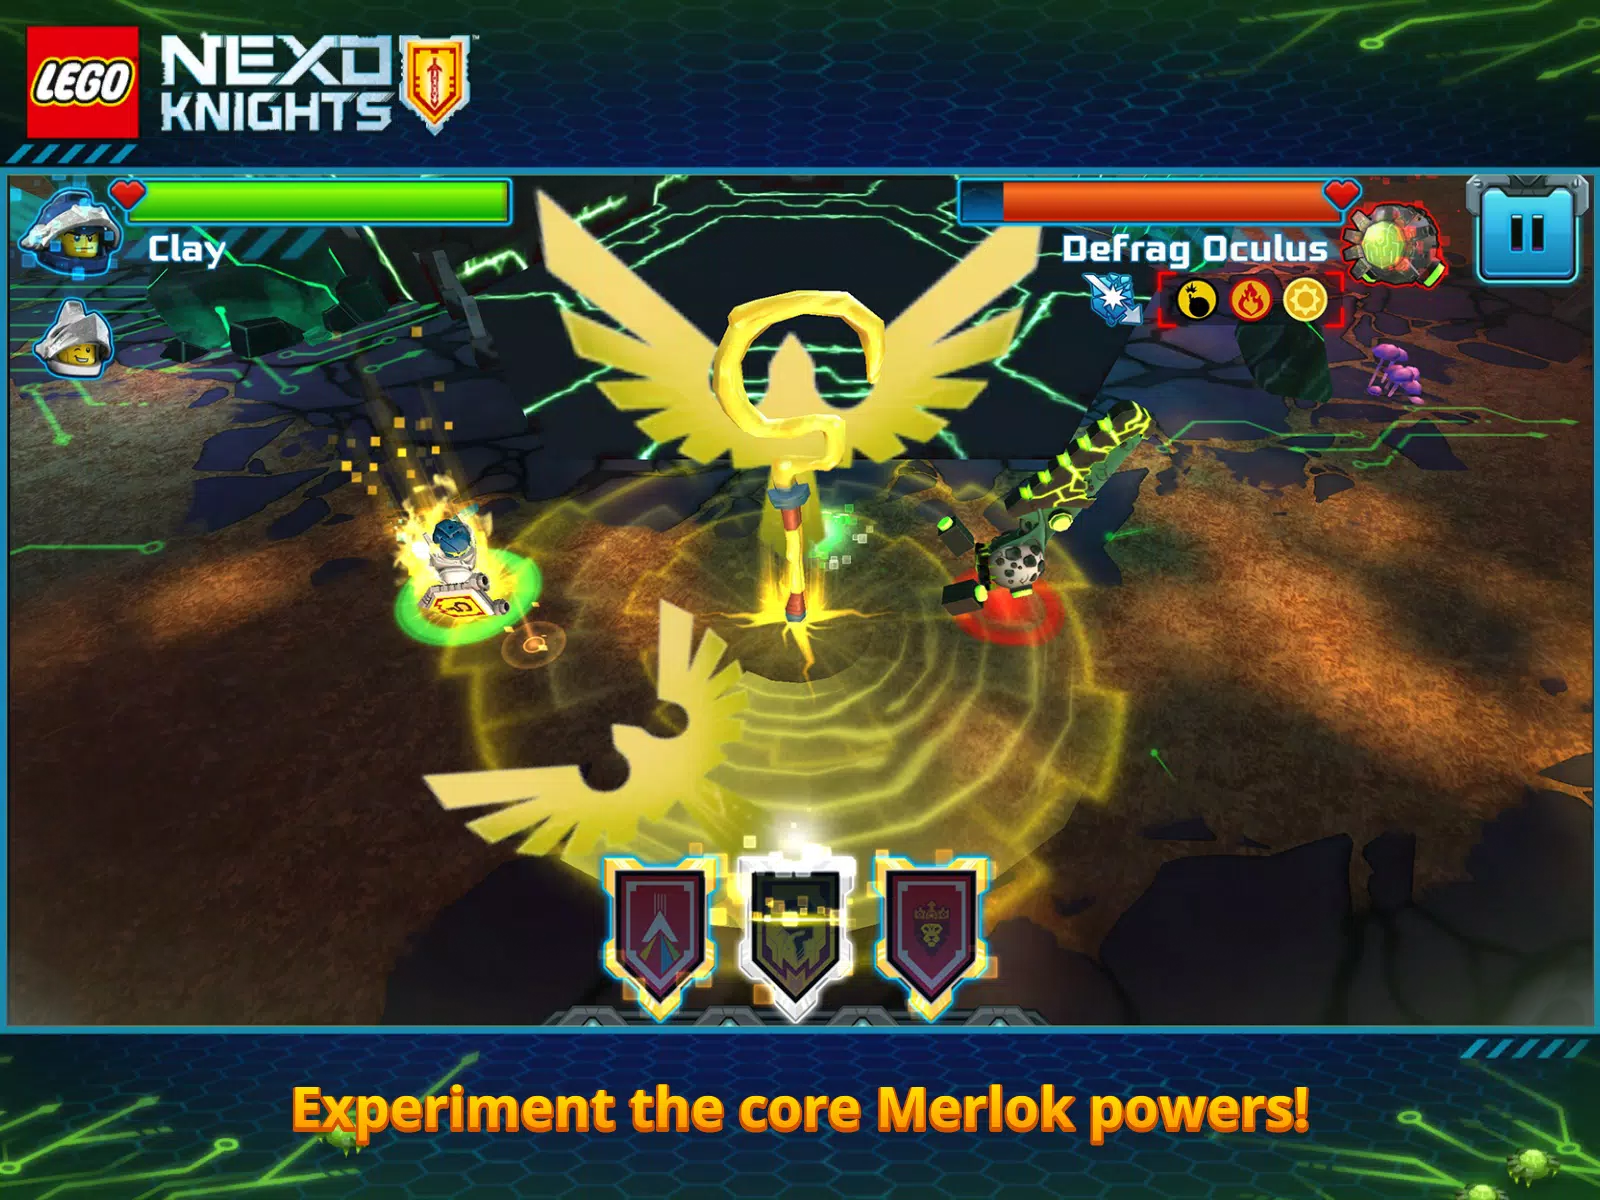 LEGO® NEXO KNIGHTS™: MERLOK 2.0 for Android - APK Download